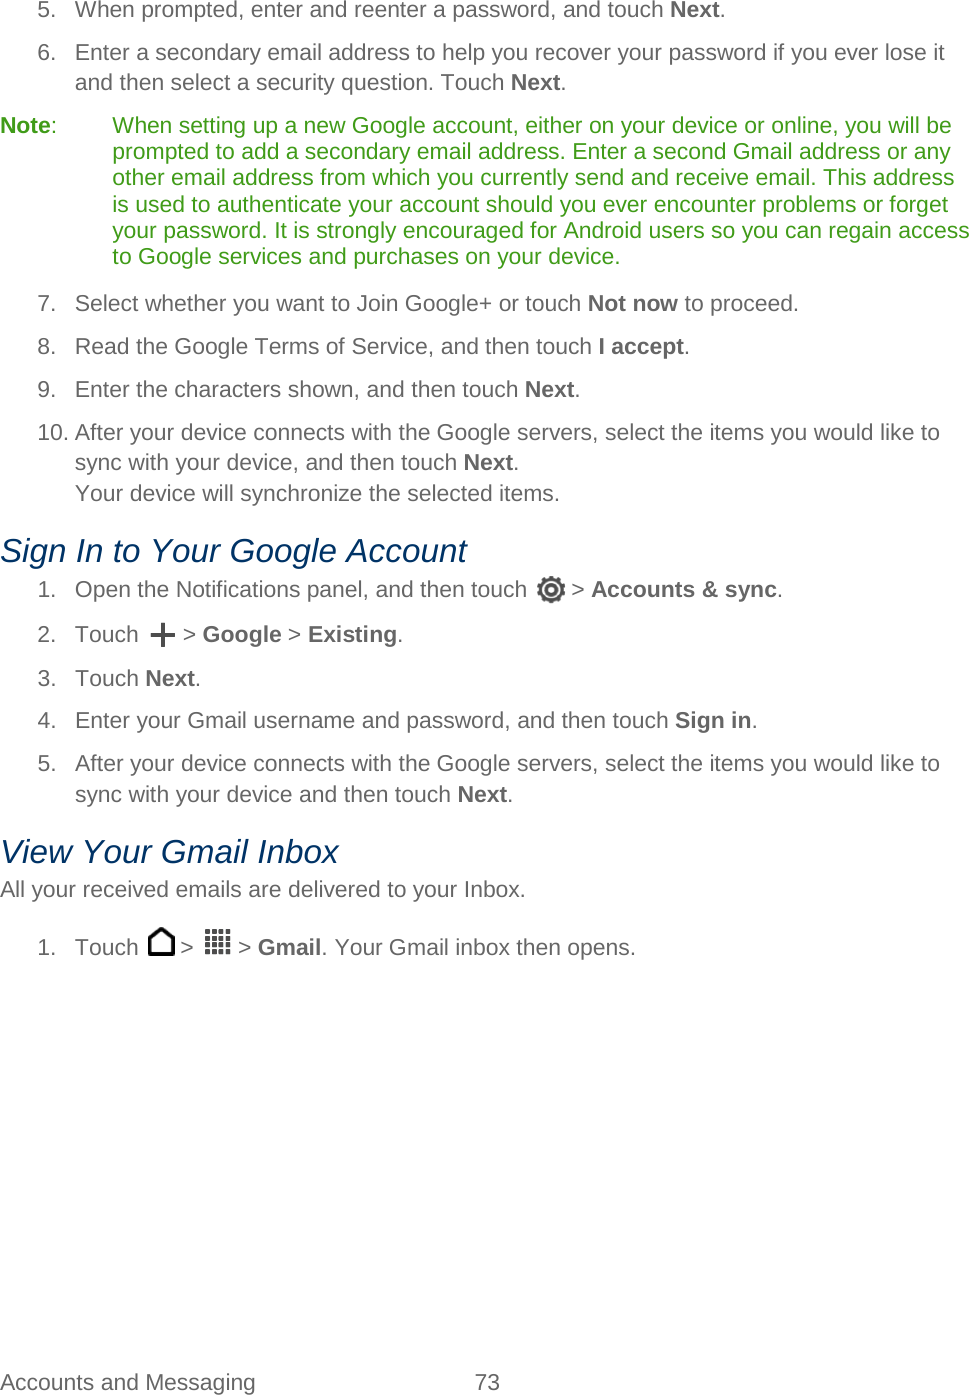  Accounts and Messaging 73   5. When prompted, enter and reenter a password, and touch Next. 6.  Enter a secondary email address to help you recover your password if you ever lose it and then select a security question. Touch Next. Note:  When setting up a new Google account, either on your device or online, you will be prompted to add a secondary email address. Enter a second Gmail address or any other email address from which you currently send and receive email. This address is used to authenticate your account should you ever encounter problems or forget your password. It is strongly encouraged for Android users so you can regain access to Google services and purchases on your device. 7. Select whether you want to Join Google+ or touch Not now to proceed. 8. Read the Google Terms of Service, and then touch I accept.  9. Enter the characters shown, and then touch Next. 10. After your device connects with the Google servers, select the items you would like to sync with your device, and then touch Next. Your device will synchronize the selected items. Sign In to Your Google Account 1. Open the Notifications panel, and then touch   &gt; Accounts &amp; sync. 2. Touch   &gt; Google &gt; Existing. 3. Touch Next. 4. Enter your Gmail username and password, and then touch Sign in. 5. After your device connects with the Google servers, select the items you would like to sync with your device and then touch Next. View Your Gmail Inbox All your received emails are delivered to your Inbox. 1. Touch   &gt;   &gt; Gmail. Your Gmail inbox then opens. 